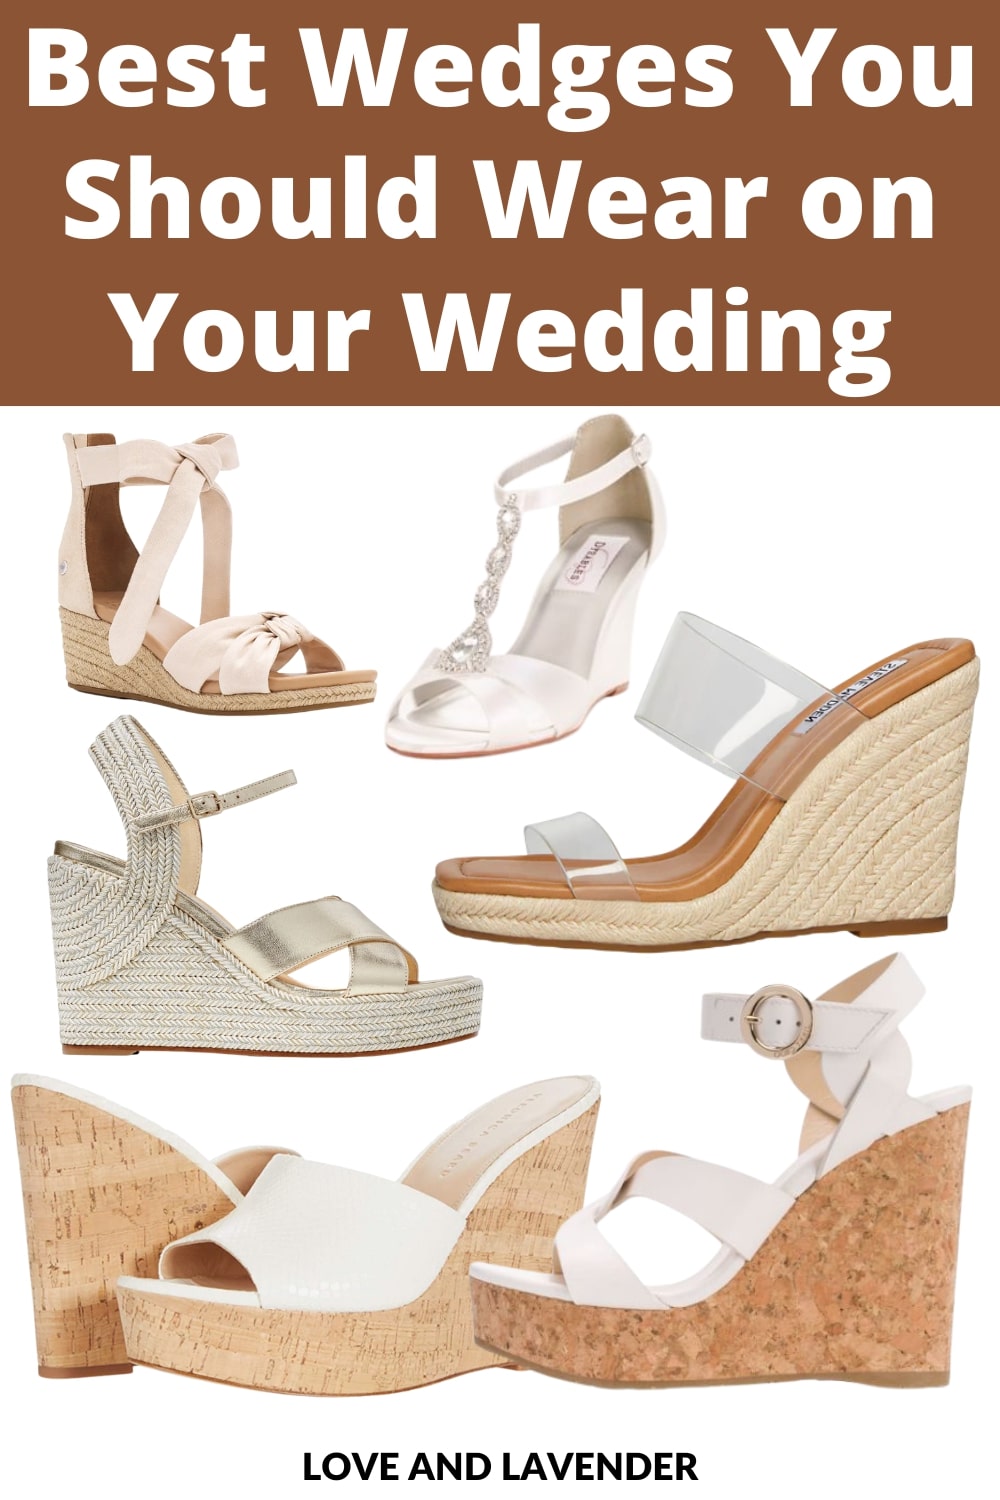 Planning a wedding can be stressful, but finding the perfect pair of wedding wedges doesn't have to be! We've rounded up our favorite picks for 2022, so you can focus on enjoying your big day!